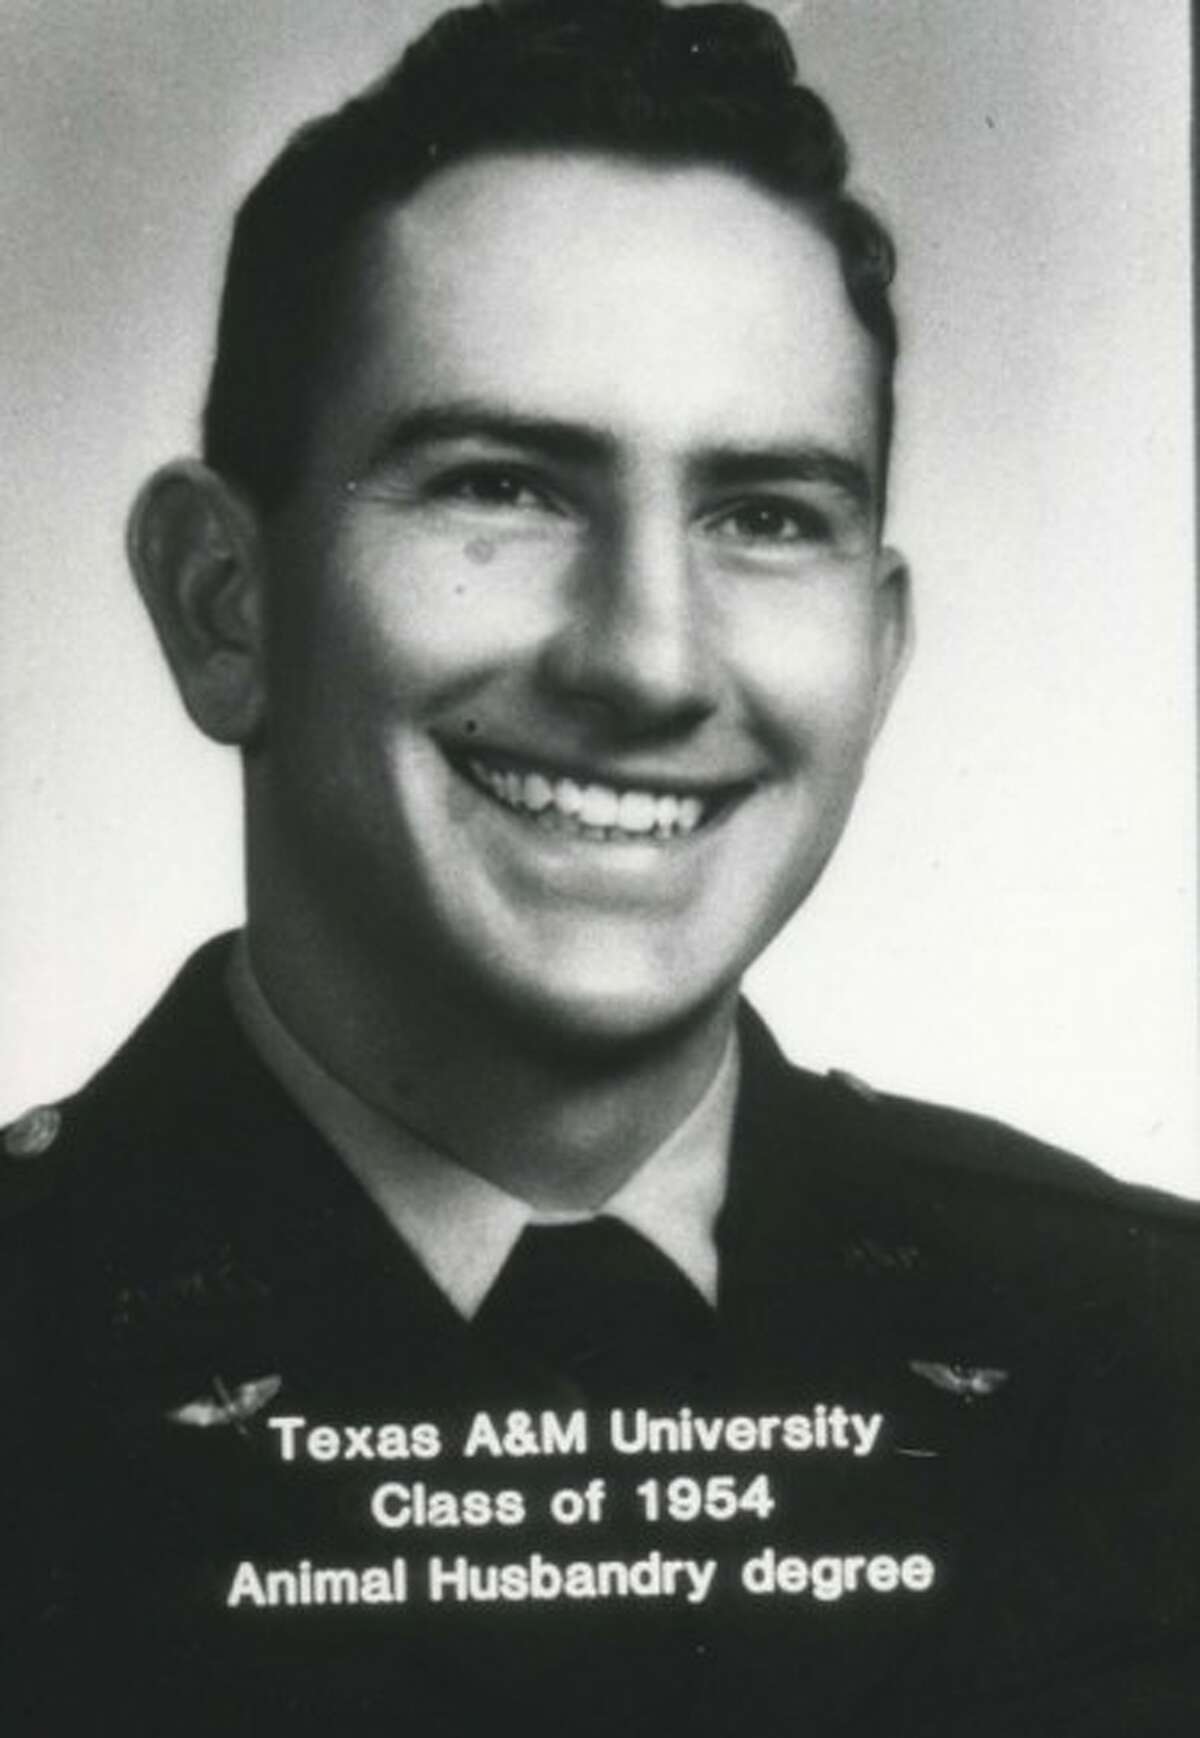 The Texas A&M’s Association of Former Students wrote on its website Saturday morning that Clayton Williams, class of 1954, was a generous supporter of A&M, providing million to the university through the Association of Former Students, the 12th Man Foundation and the Texas A&M Foundation.